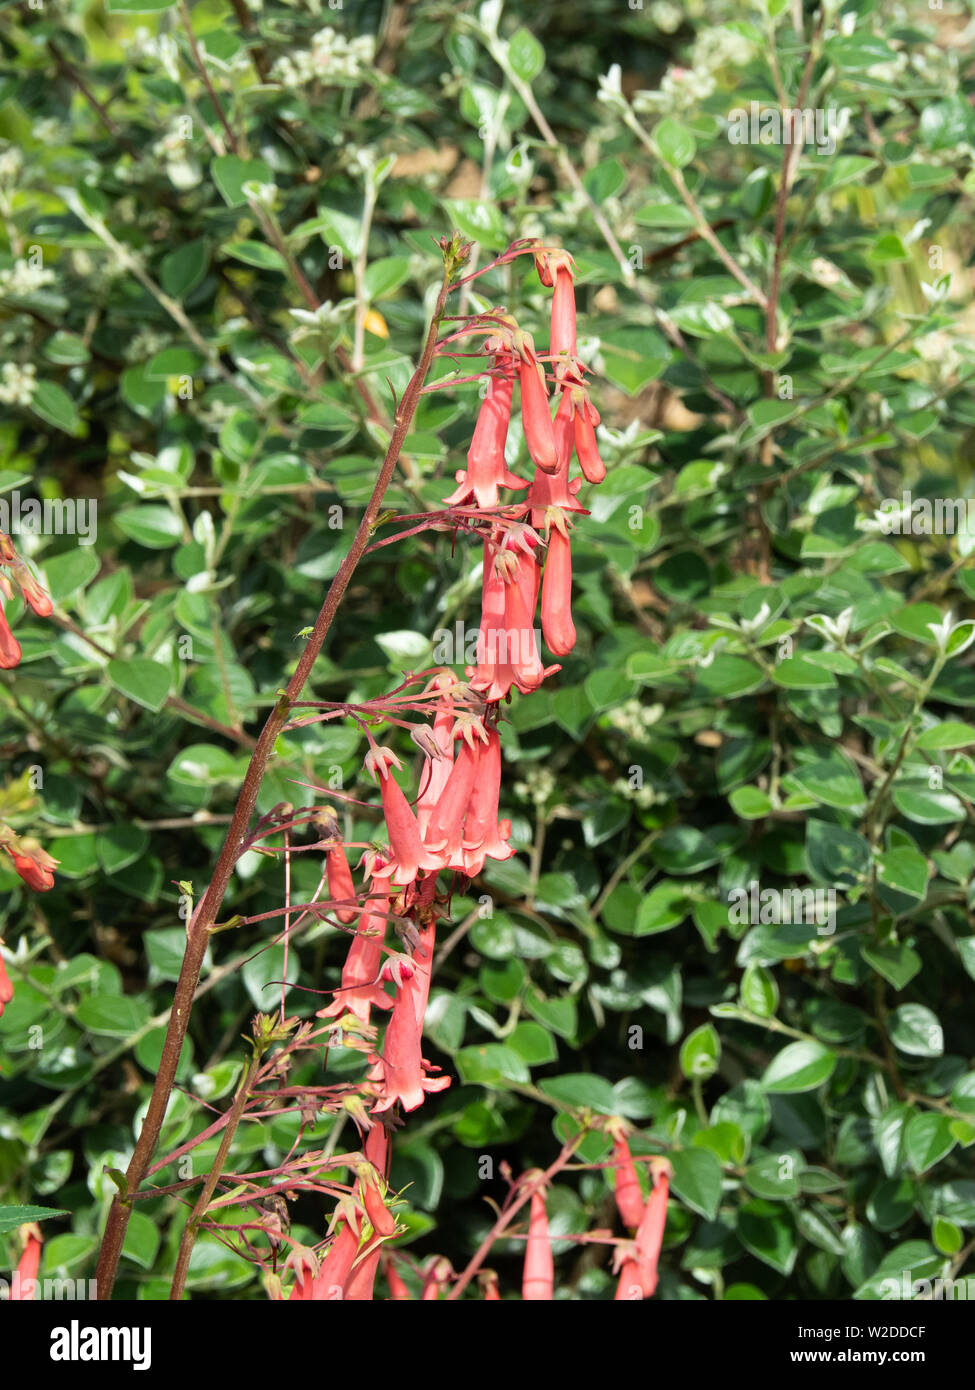 The reddish pink flowers of Phygelius Devils Tears Stock Photo